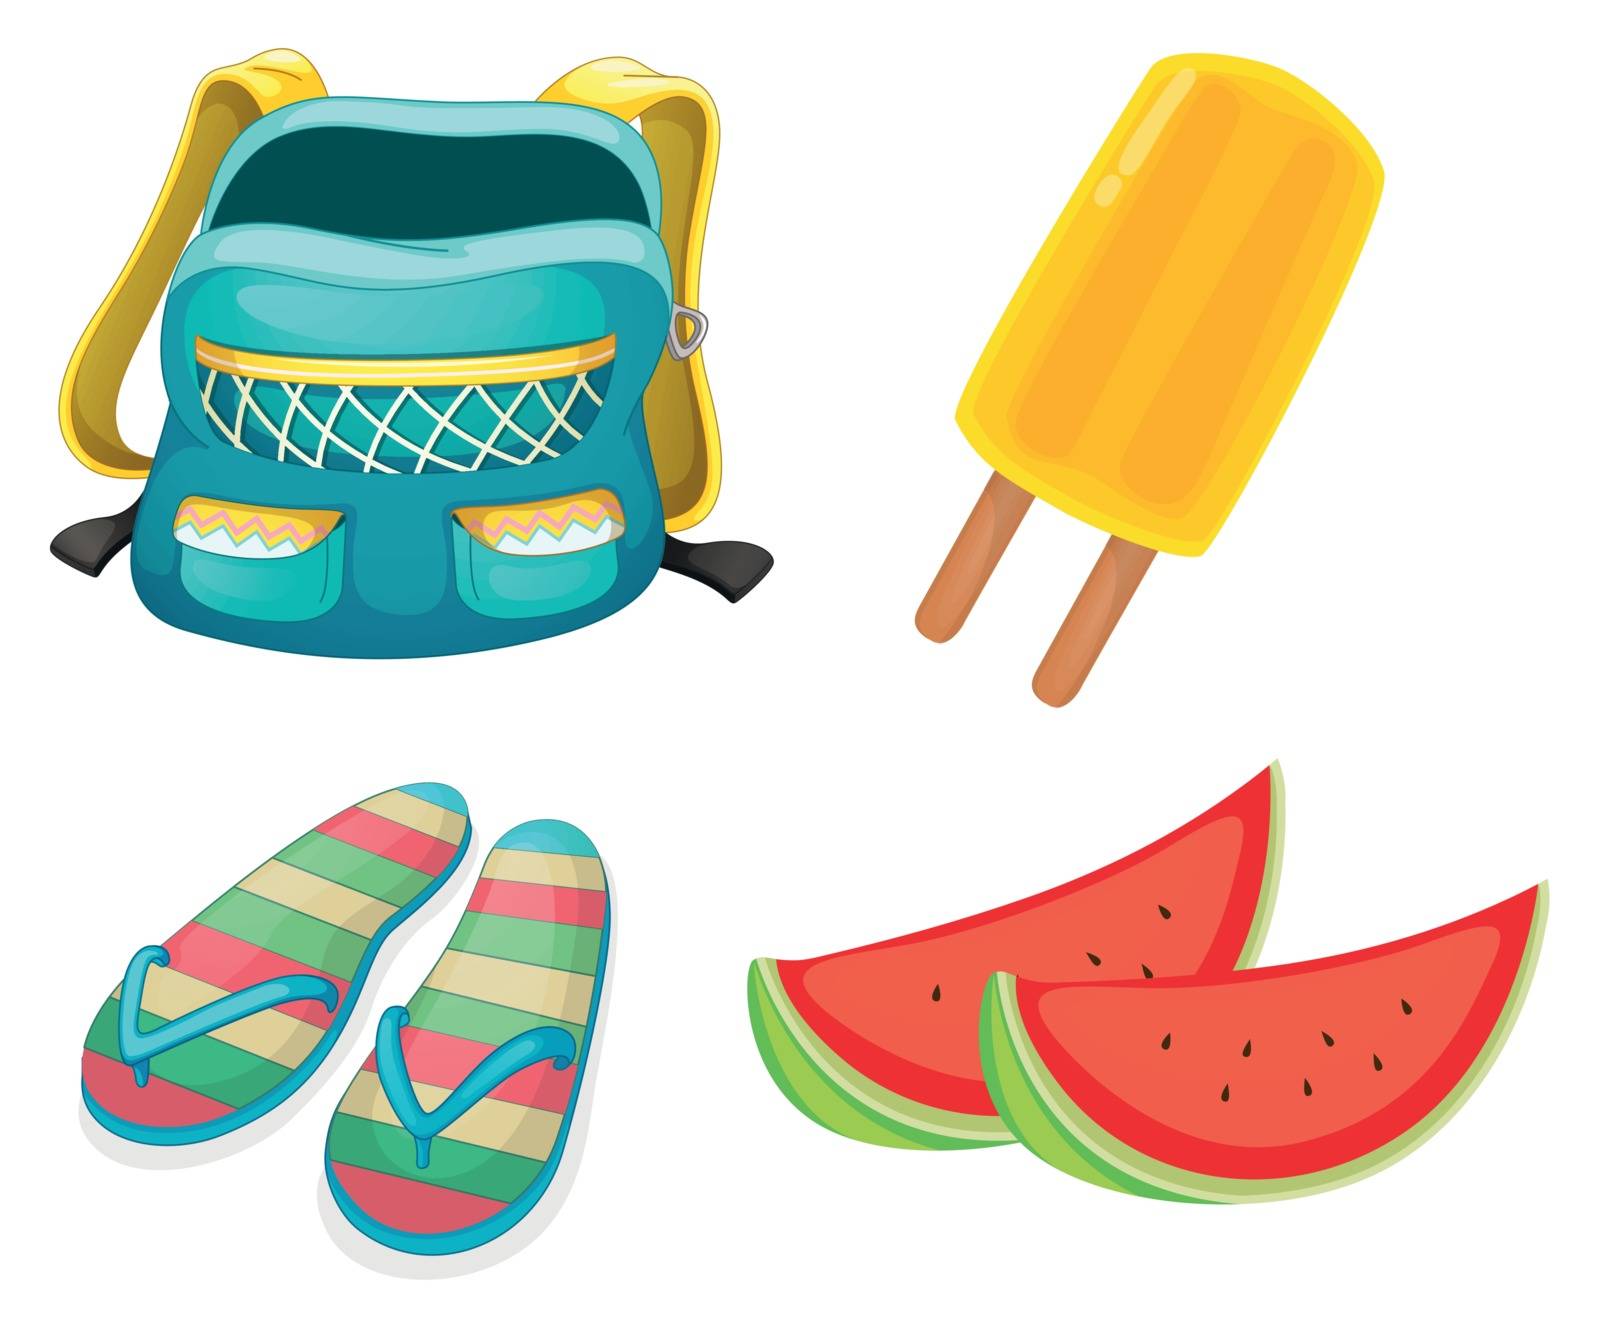 Illustration of a backpack, a pair of slippers and foods for refreshment on a white background